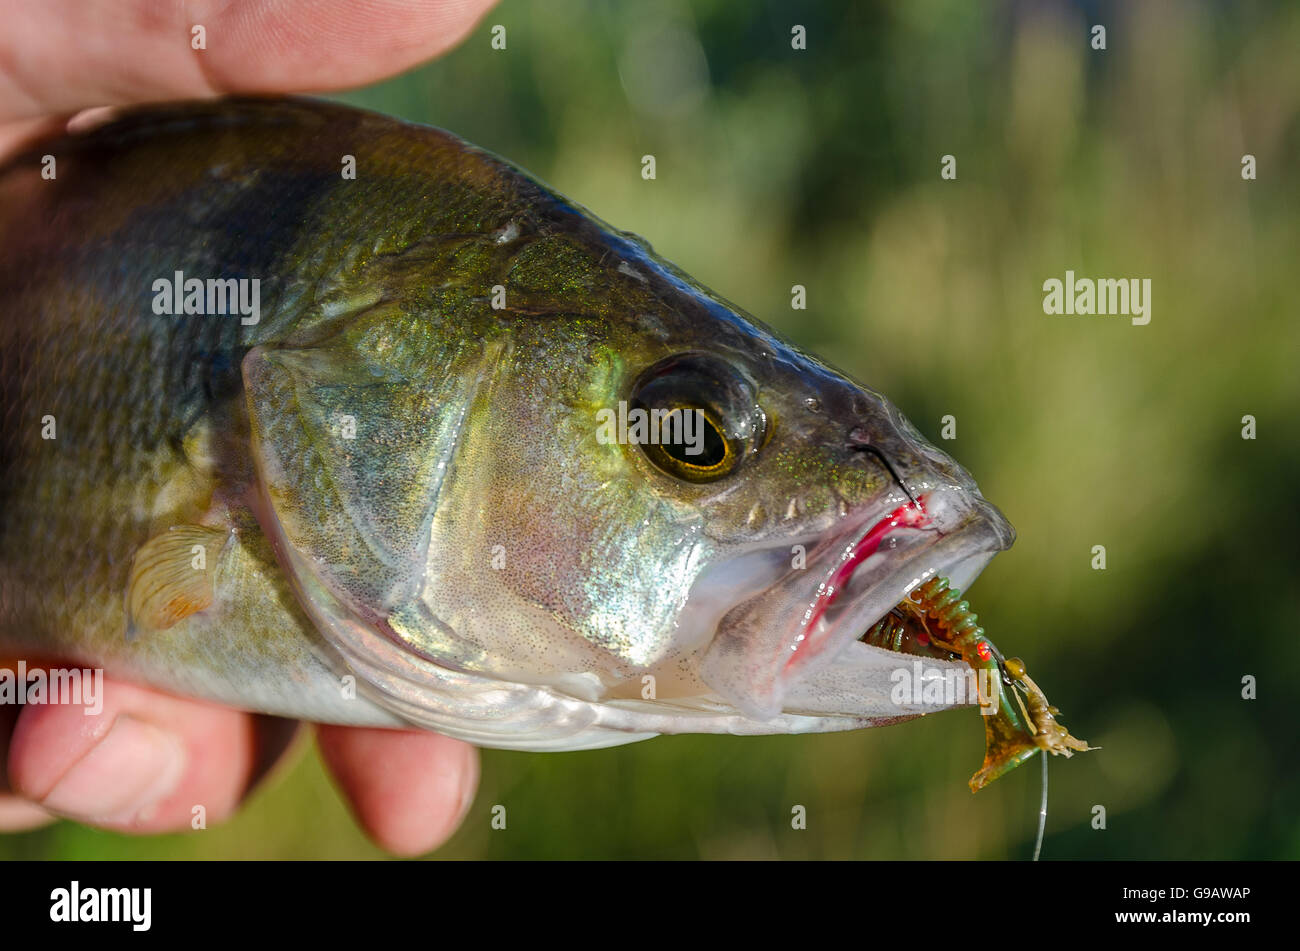 Perch caught on a hook in the hands of the fisherman Stock Photo